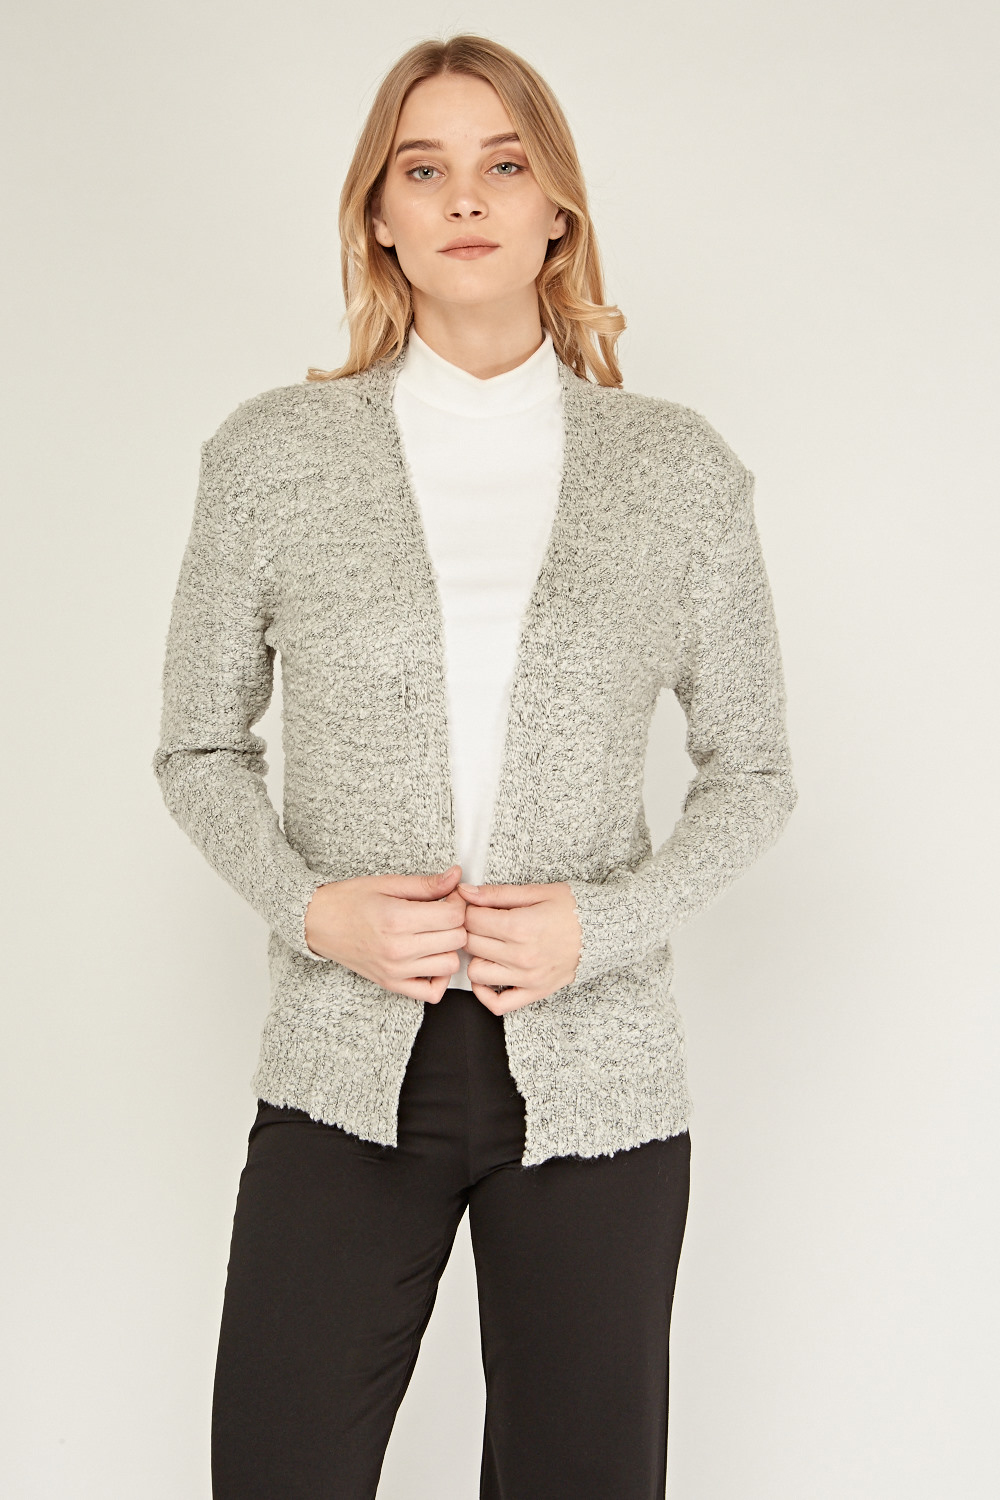 Textured Bobble Knit Cardigan Just 6